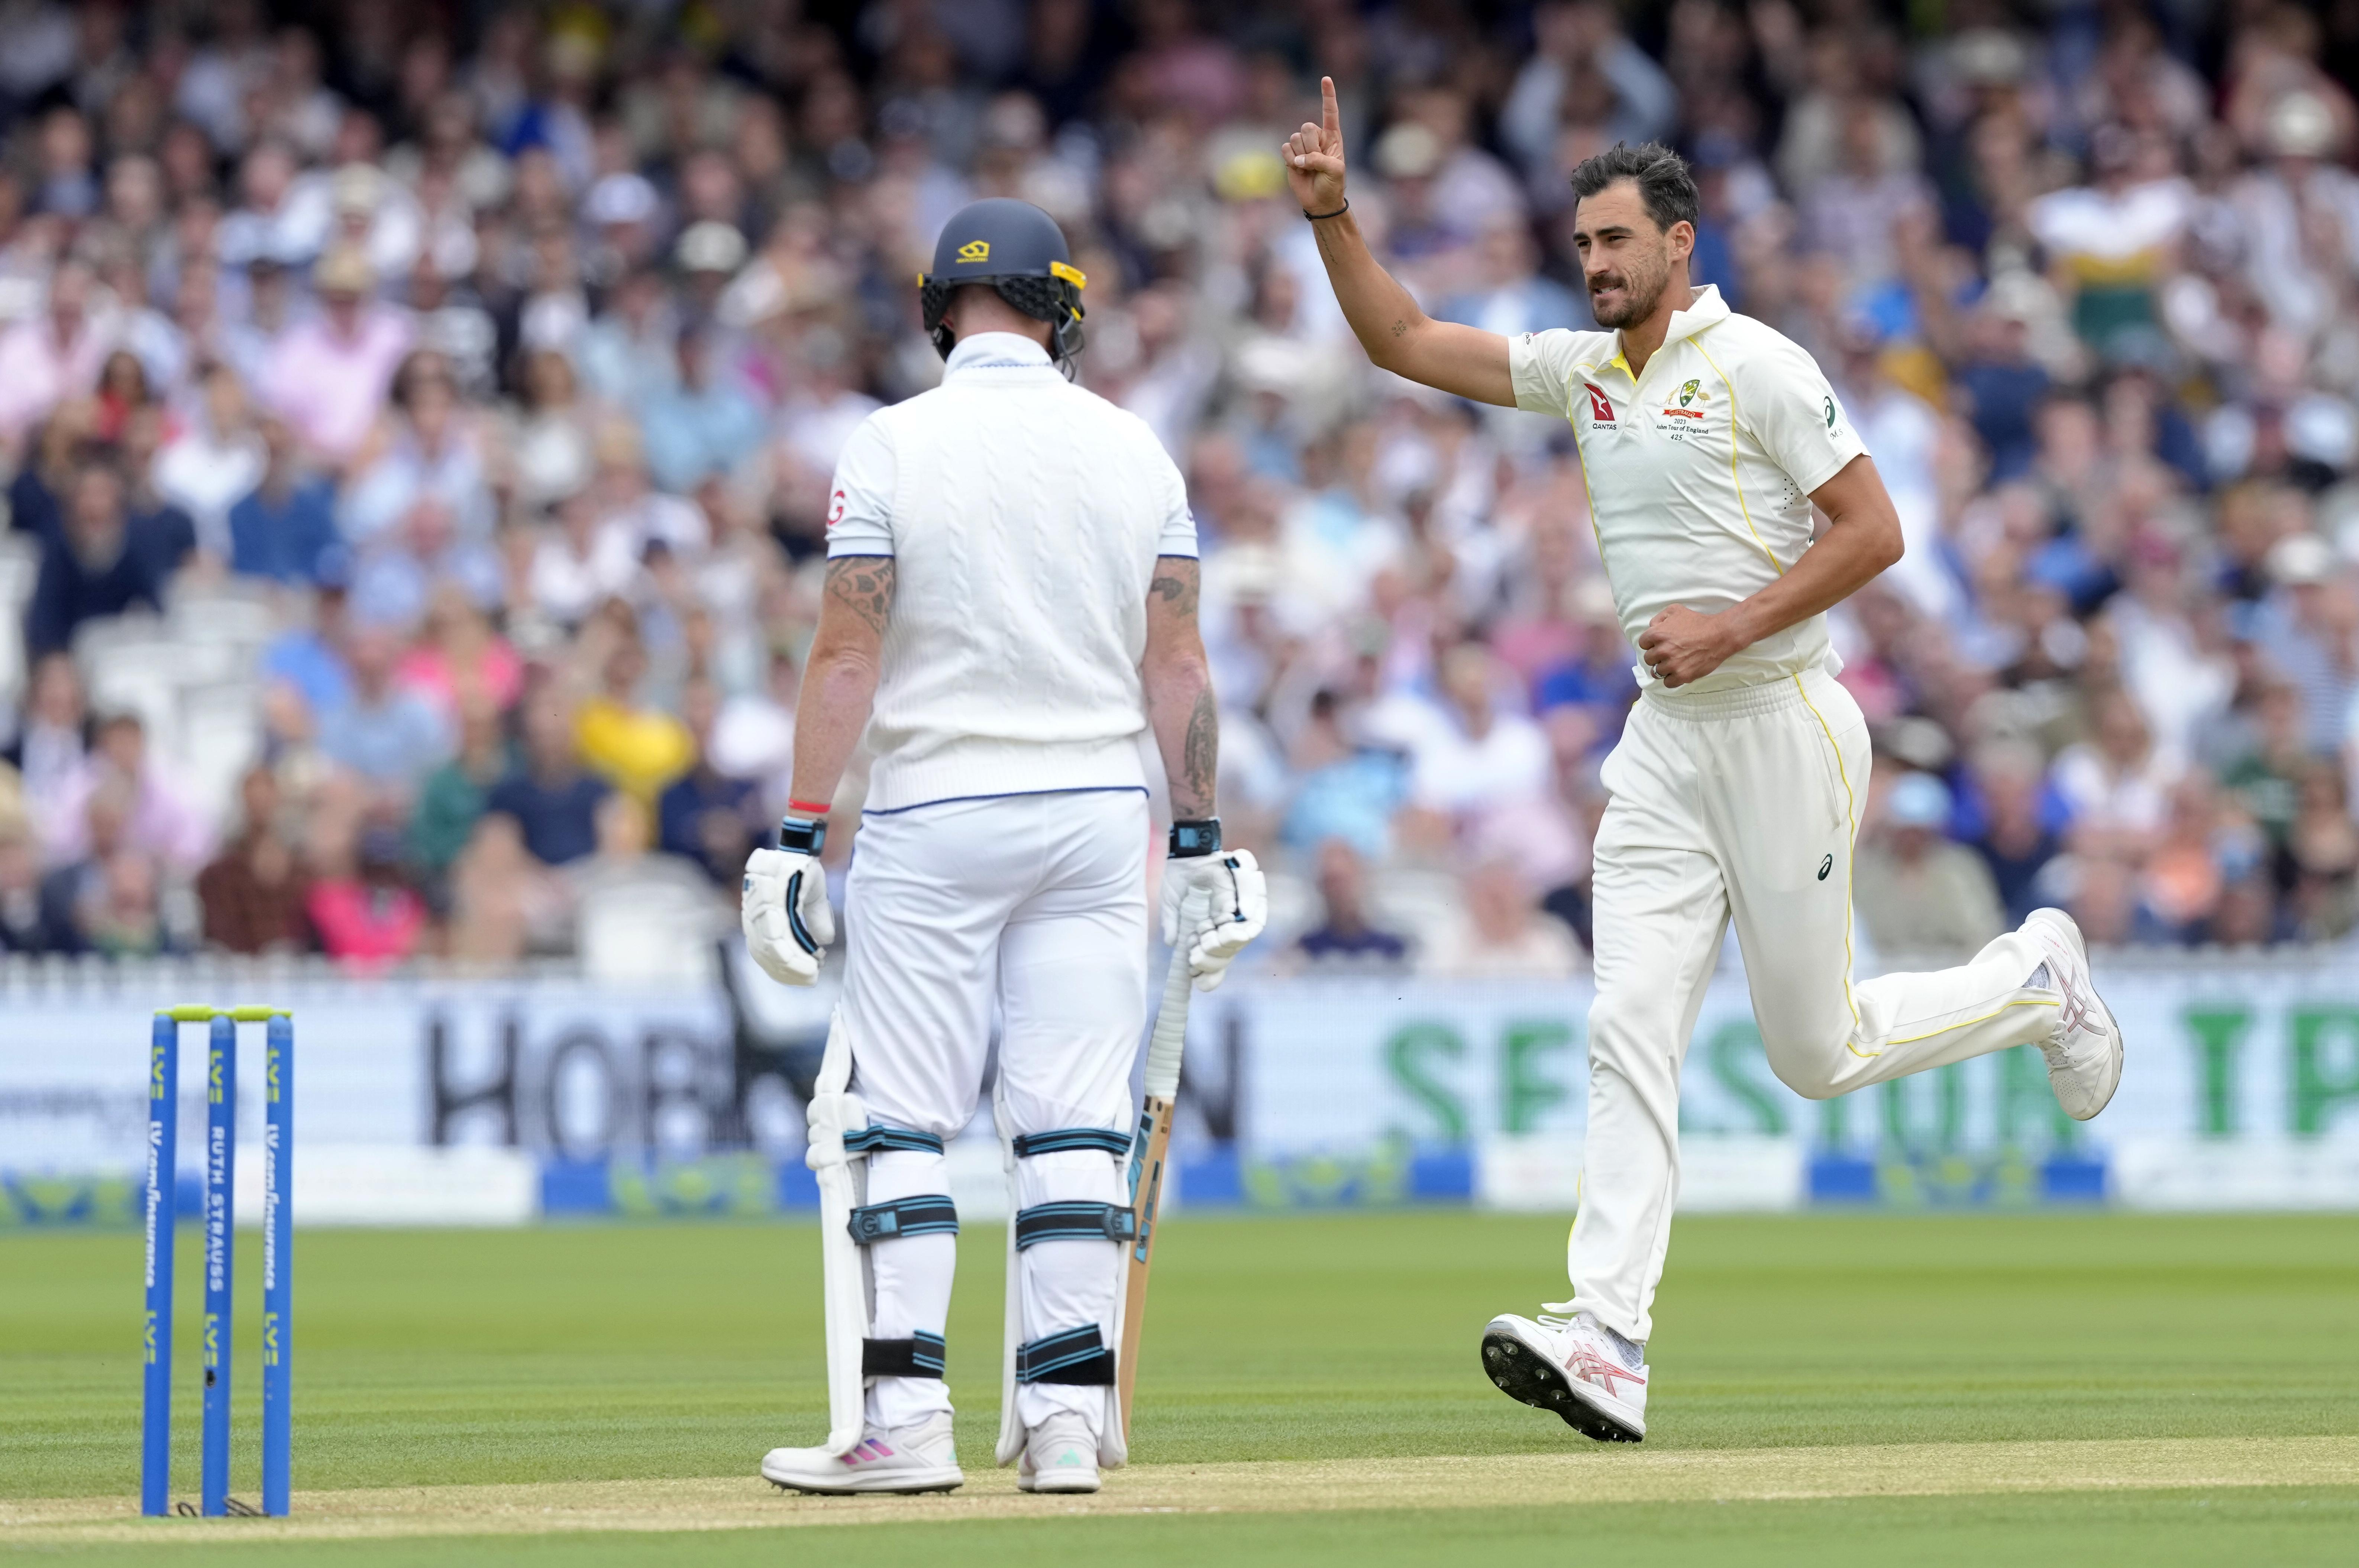 Australia extends lead over England to 221 runs before rain ends Day 3 at Lords